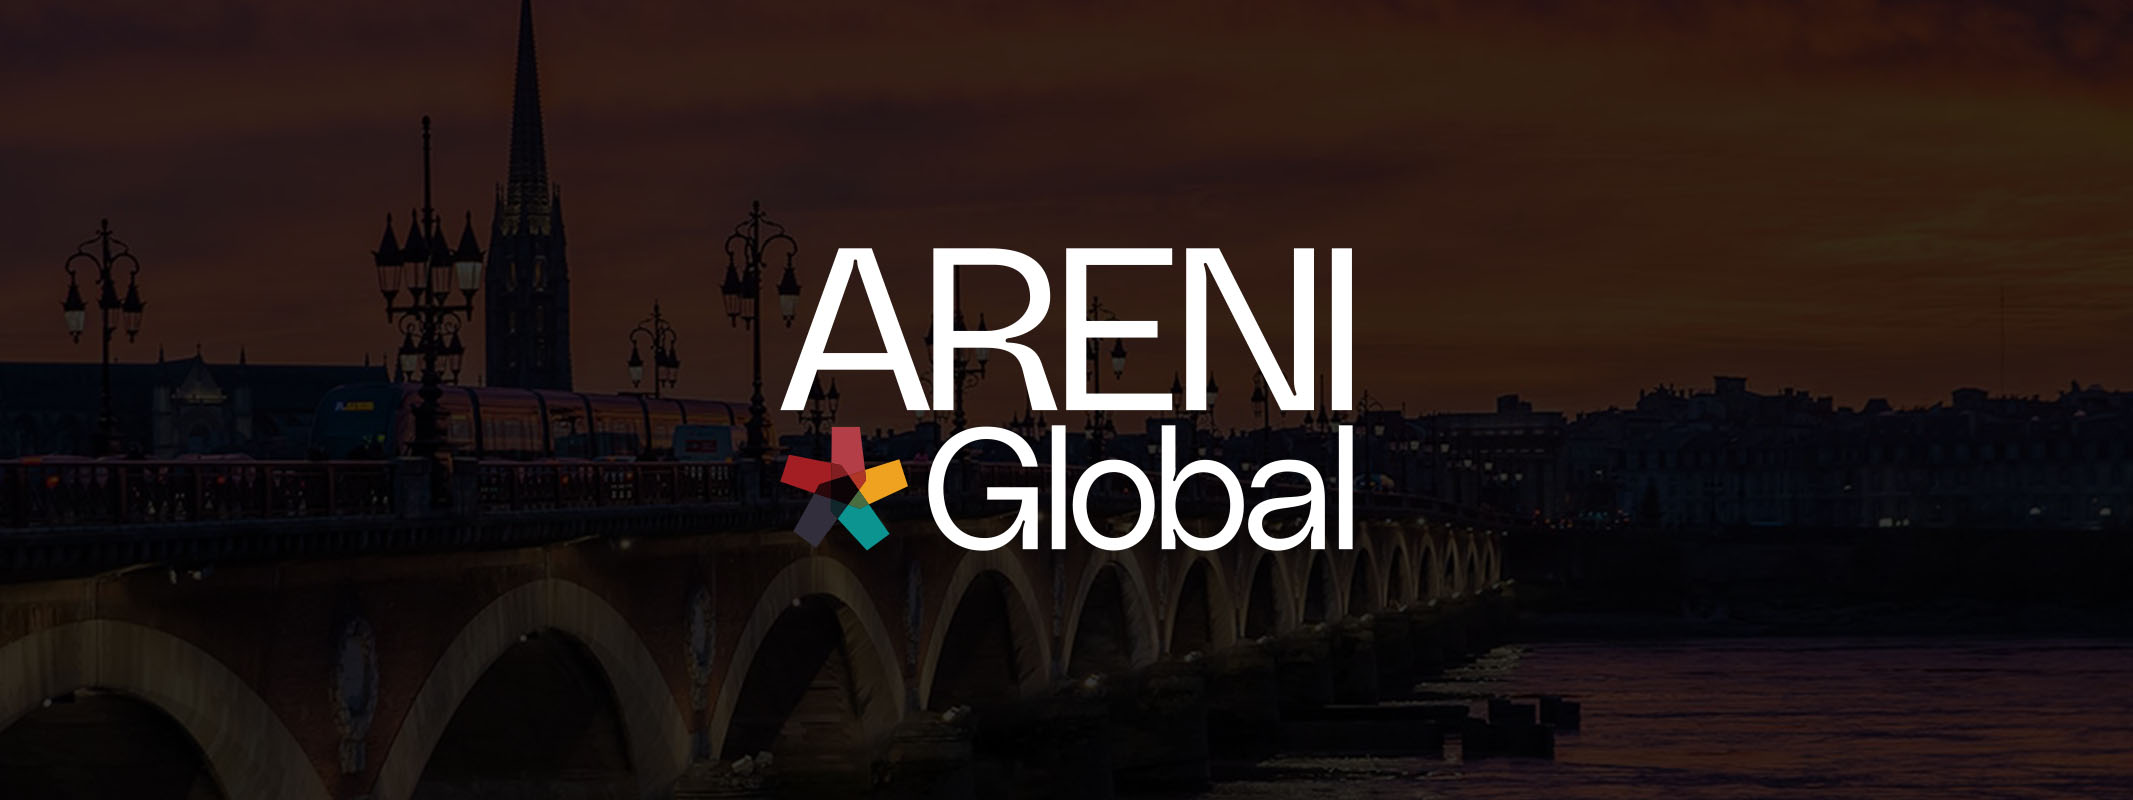 Areni Global logo superimposed over a stylistic background